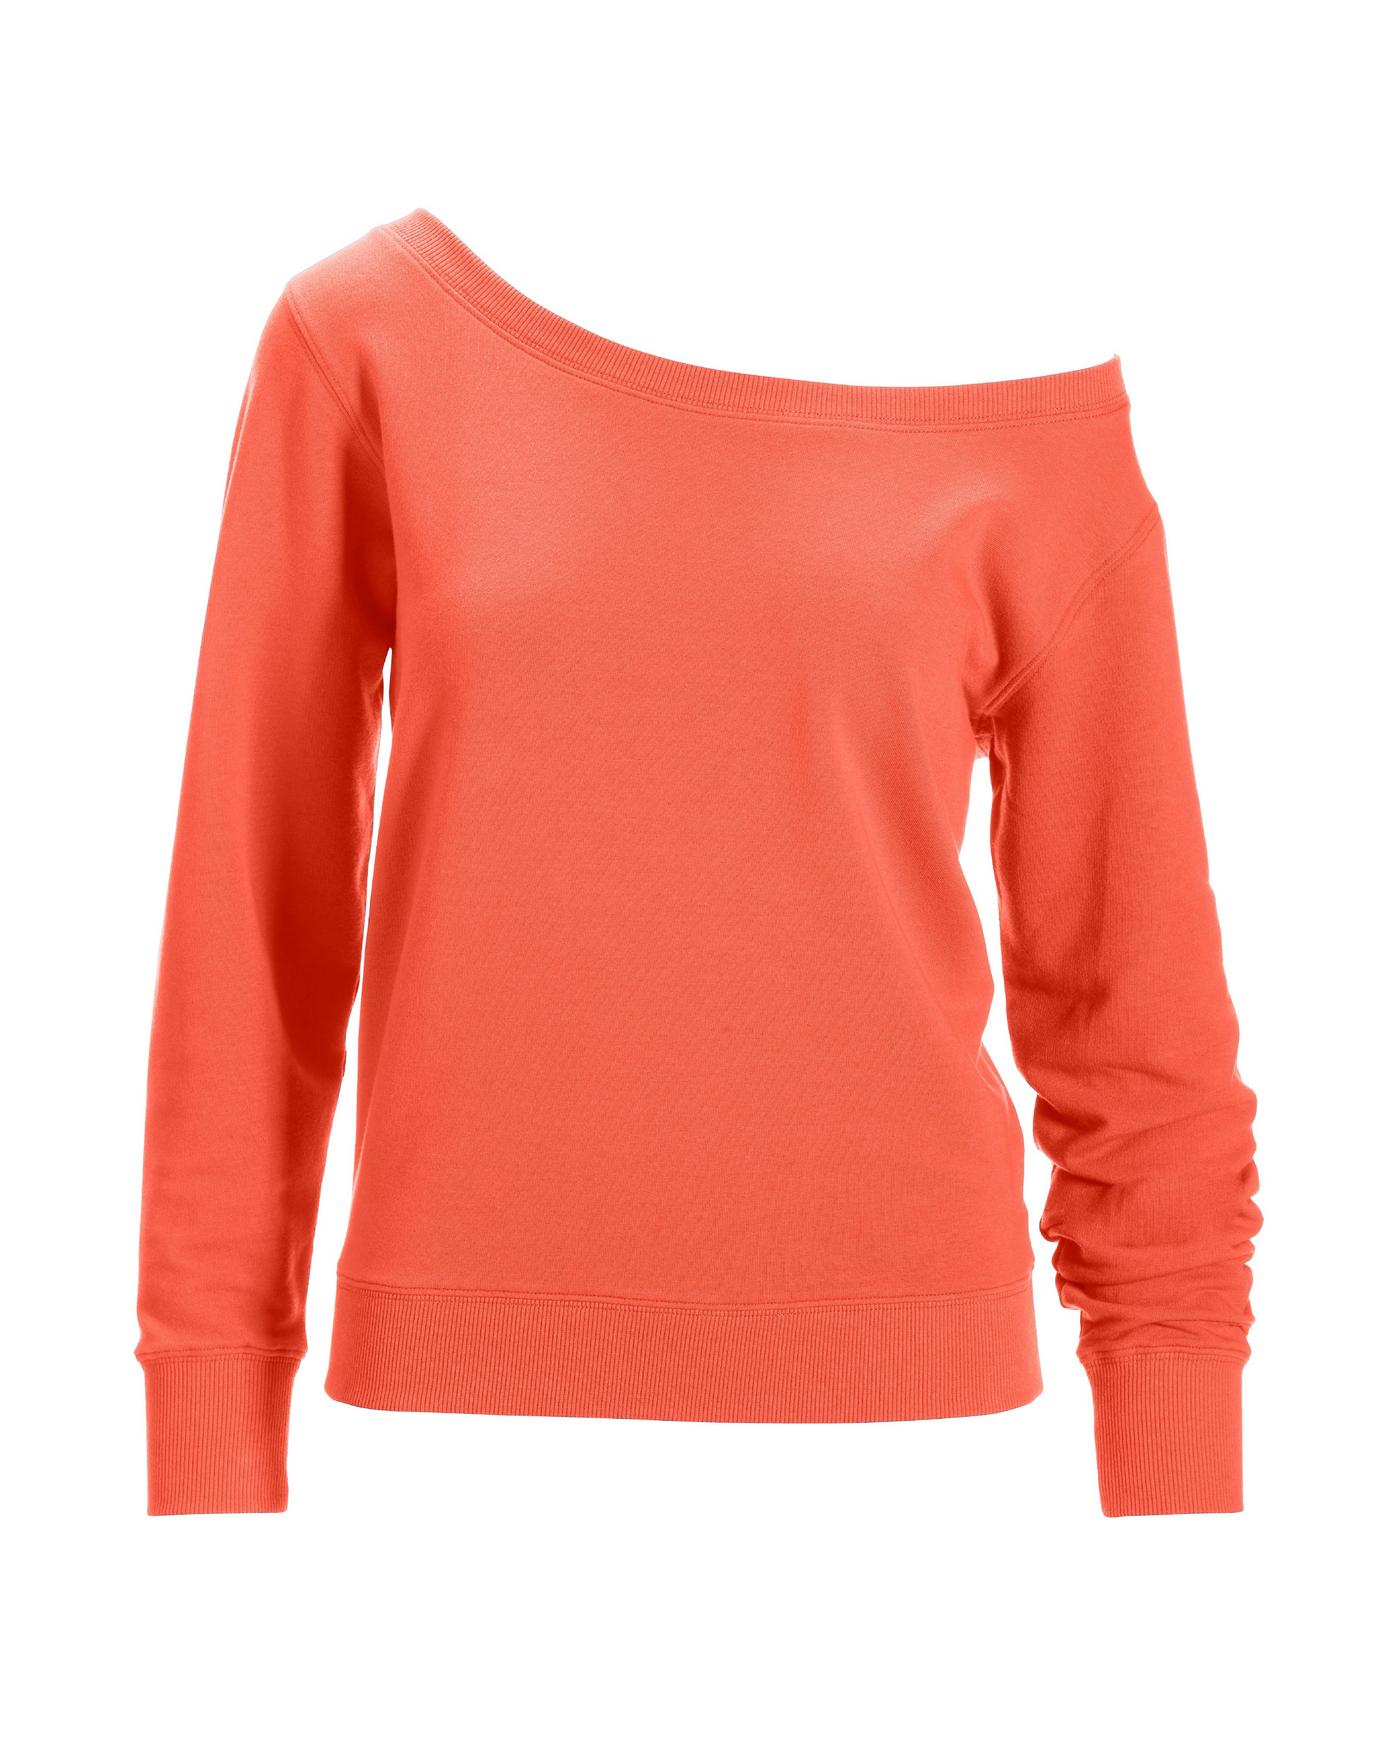 Hot Proper Terry - | Pullover Orange Boston French Sweatshirt Coral Slouchy